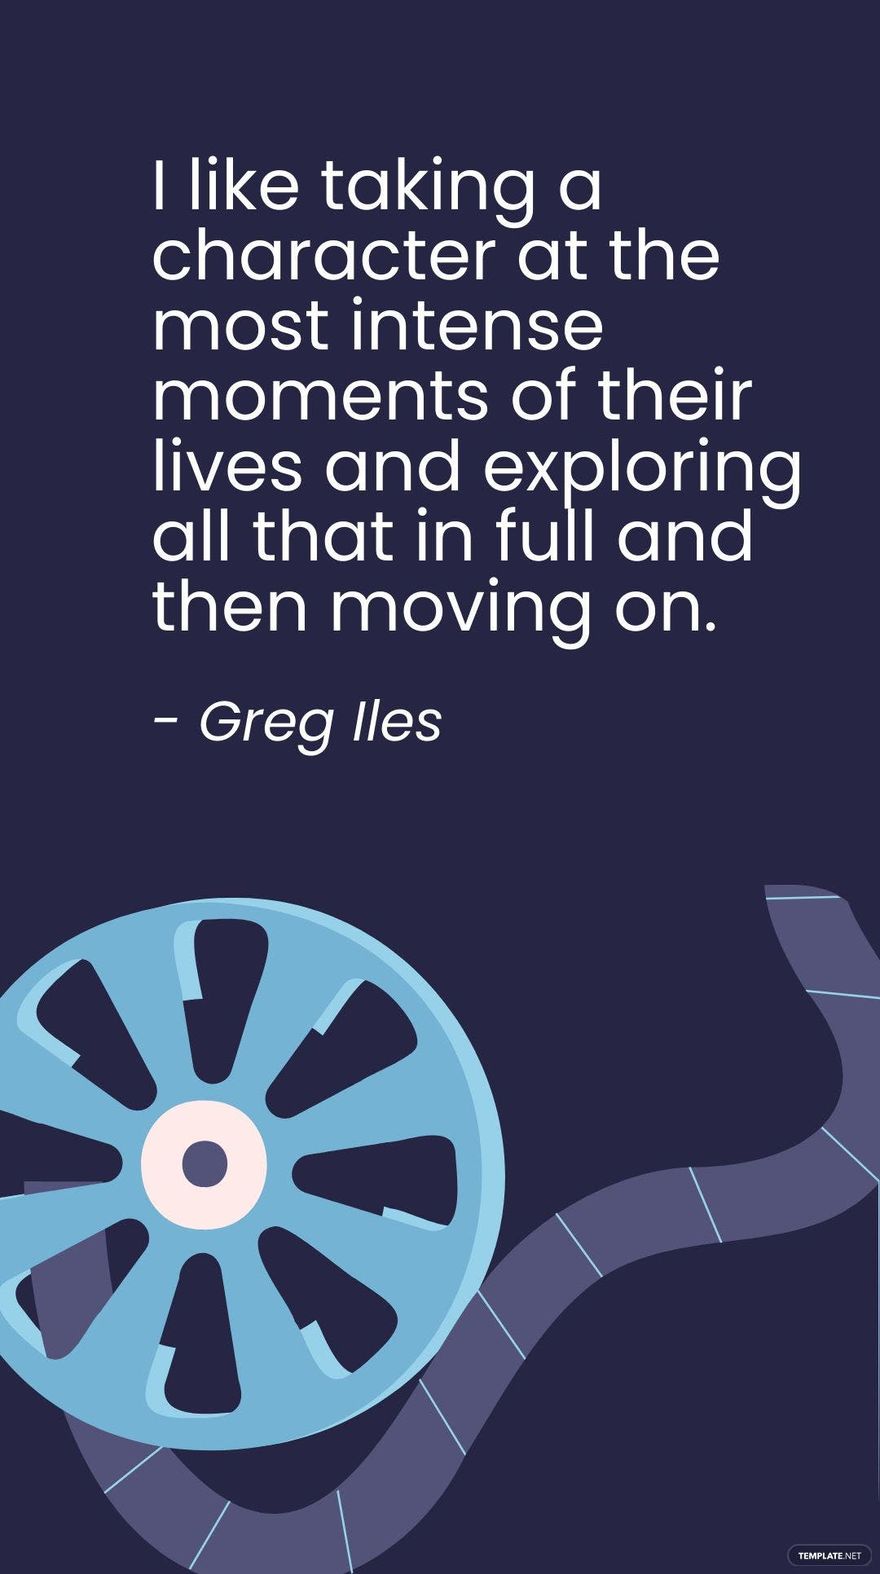 Free Greg Iles - I like taking a character at the most intense moments of their lives and exploring all that in full and then moving on.